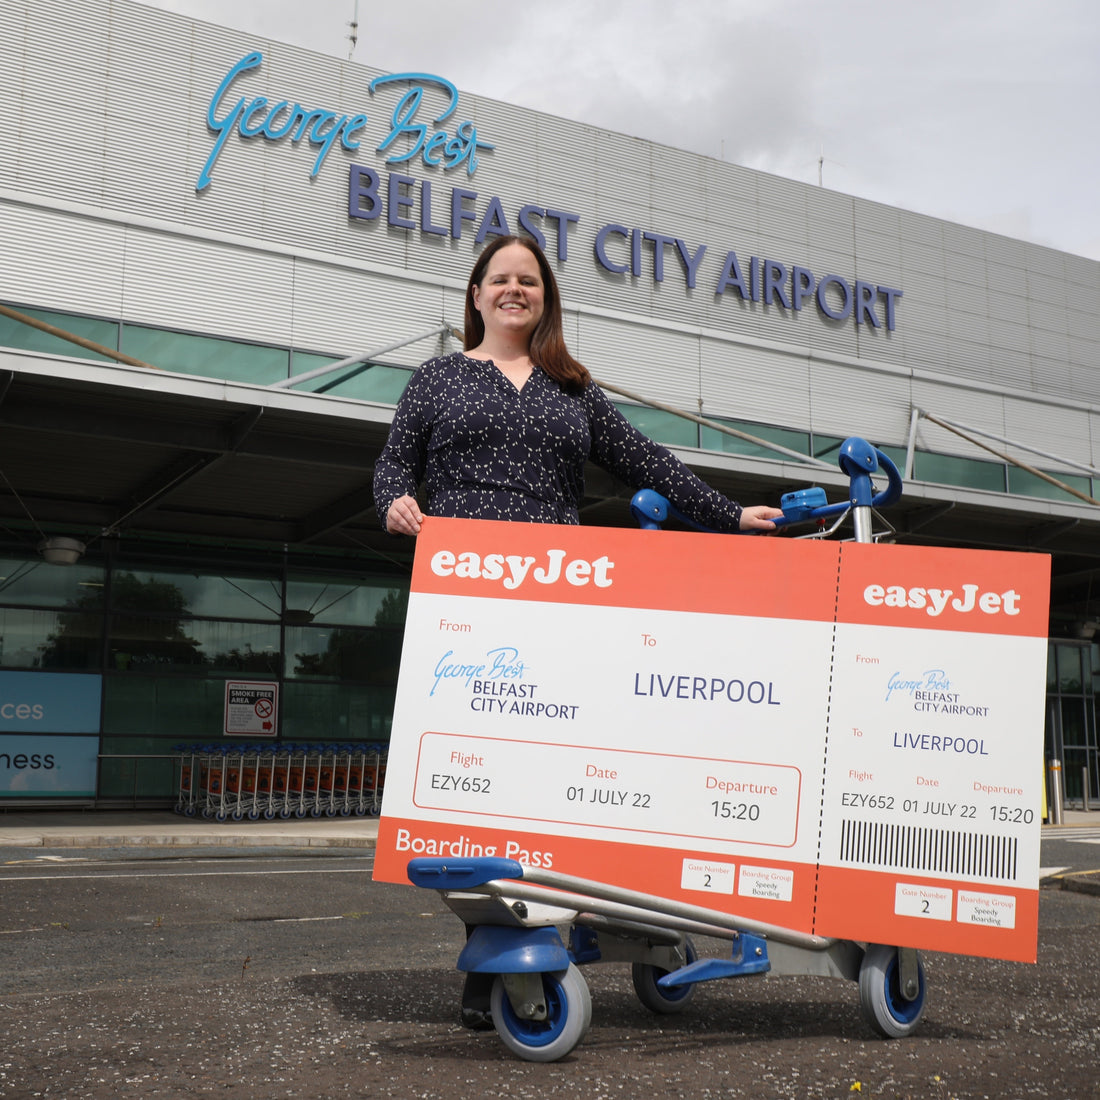 New services departing from Belfast City Airport